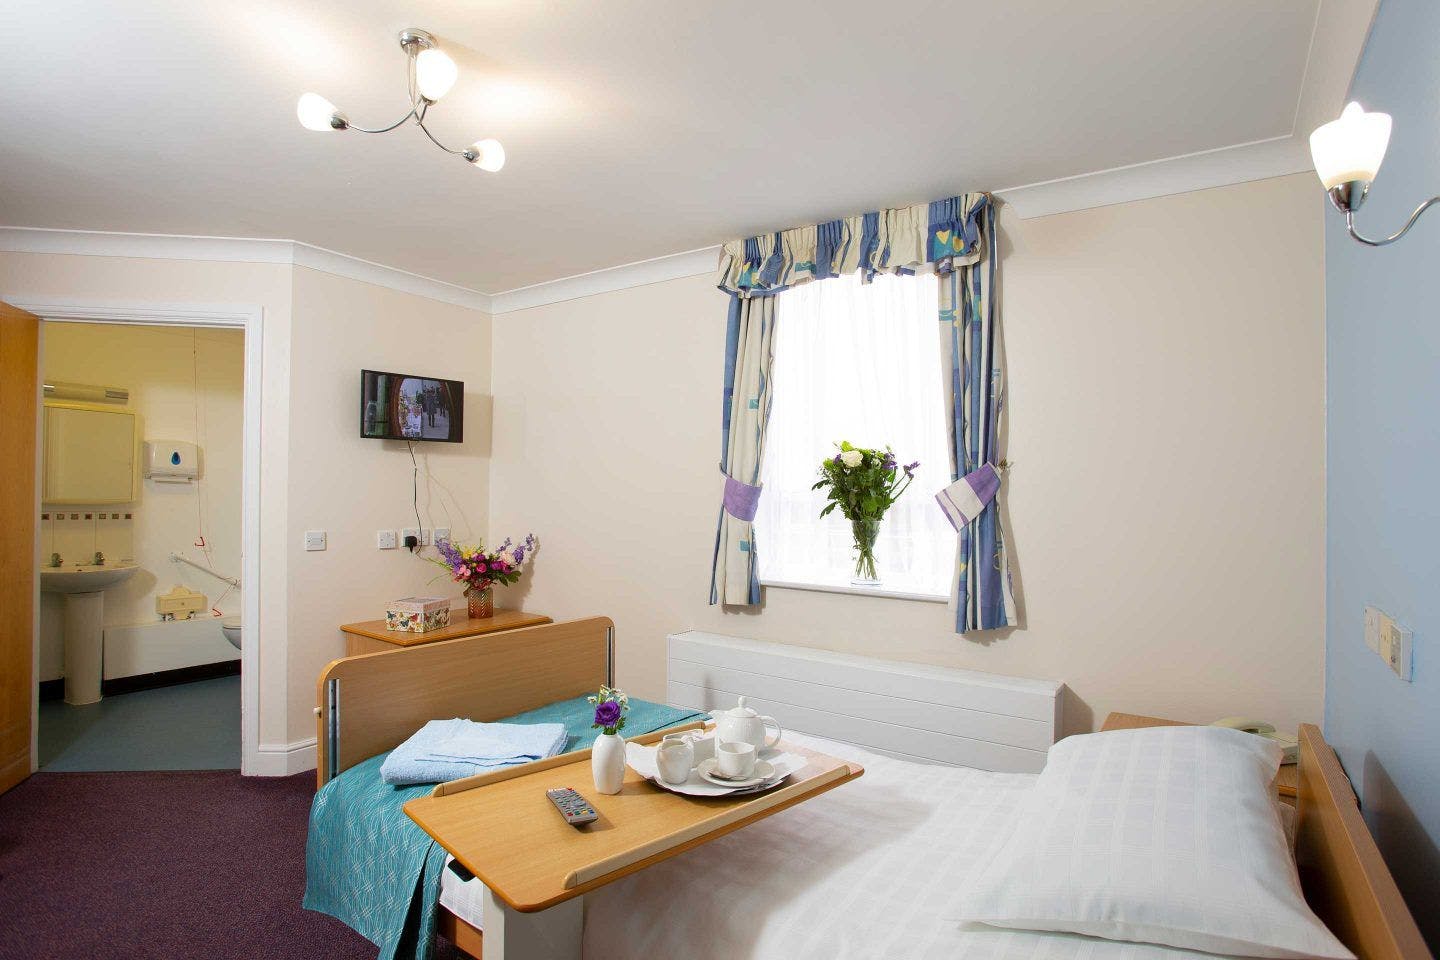 Ganymede Care - The Chiswick care home 5